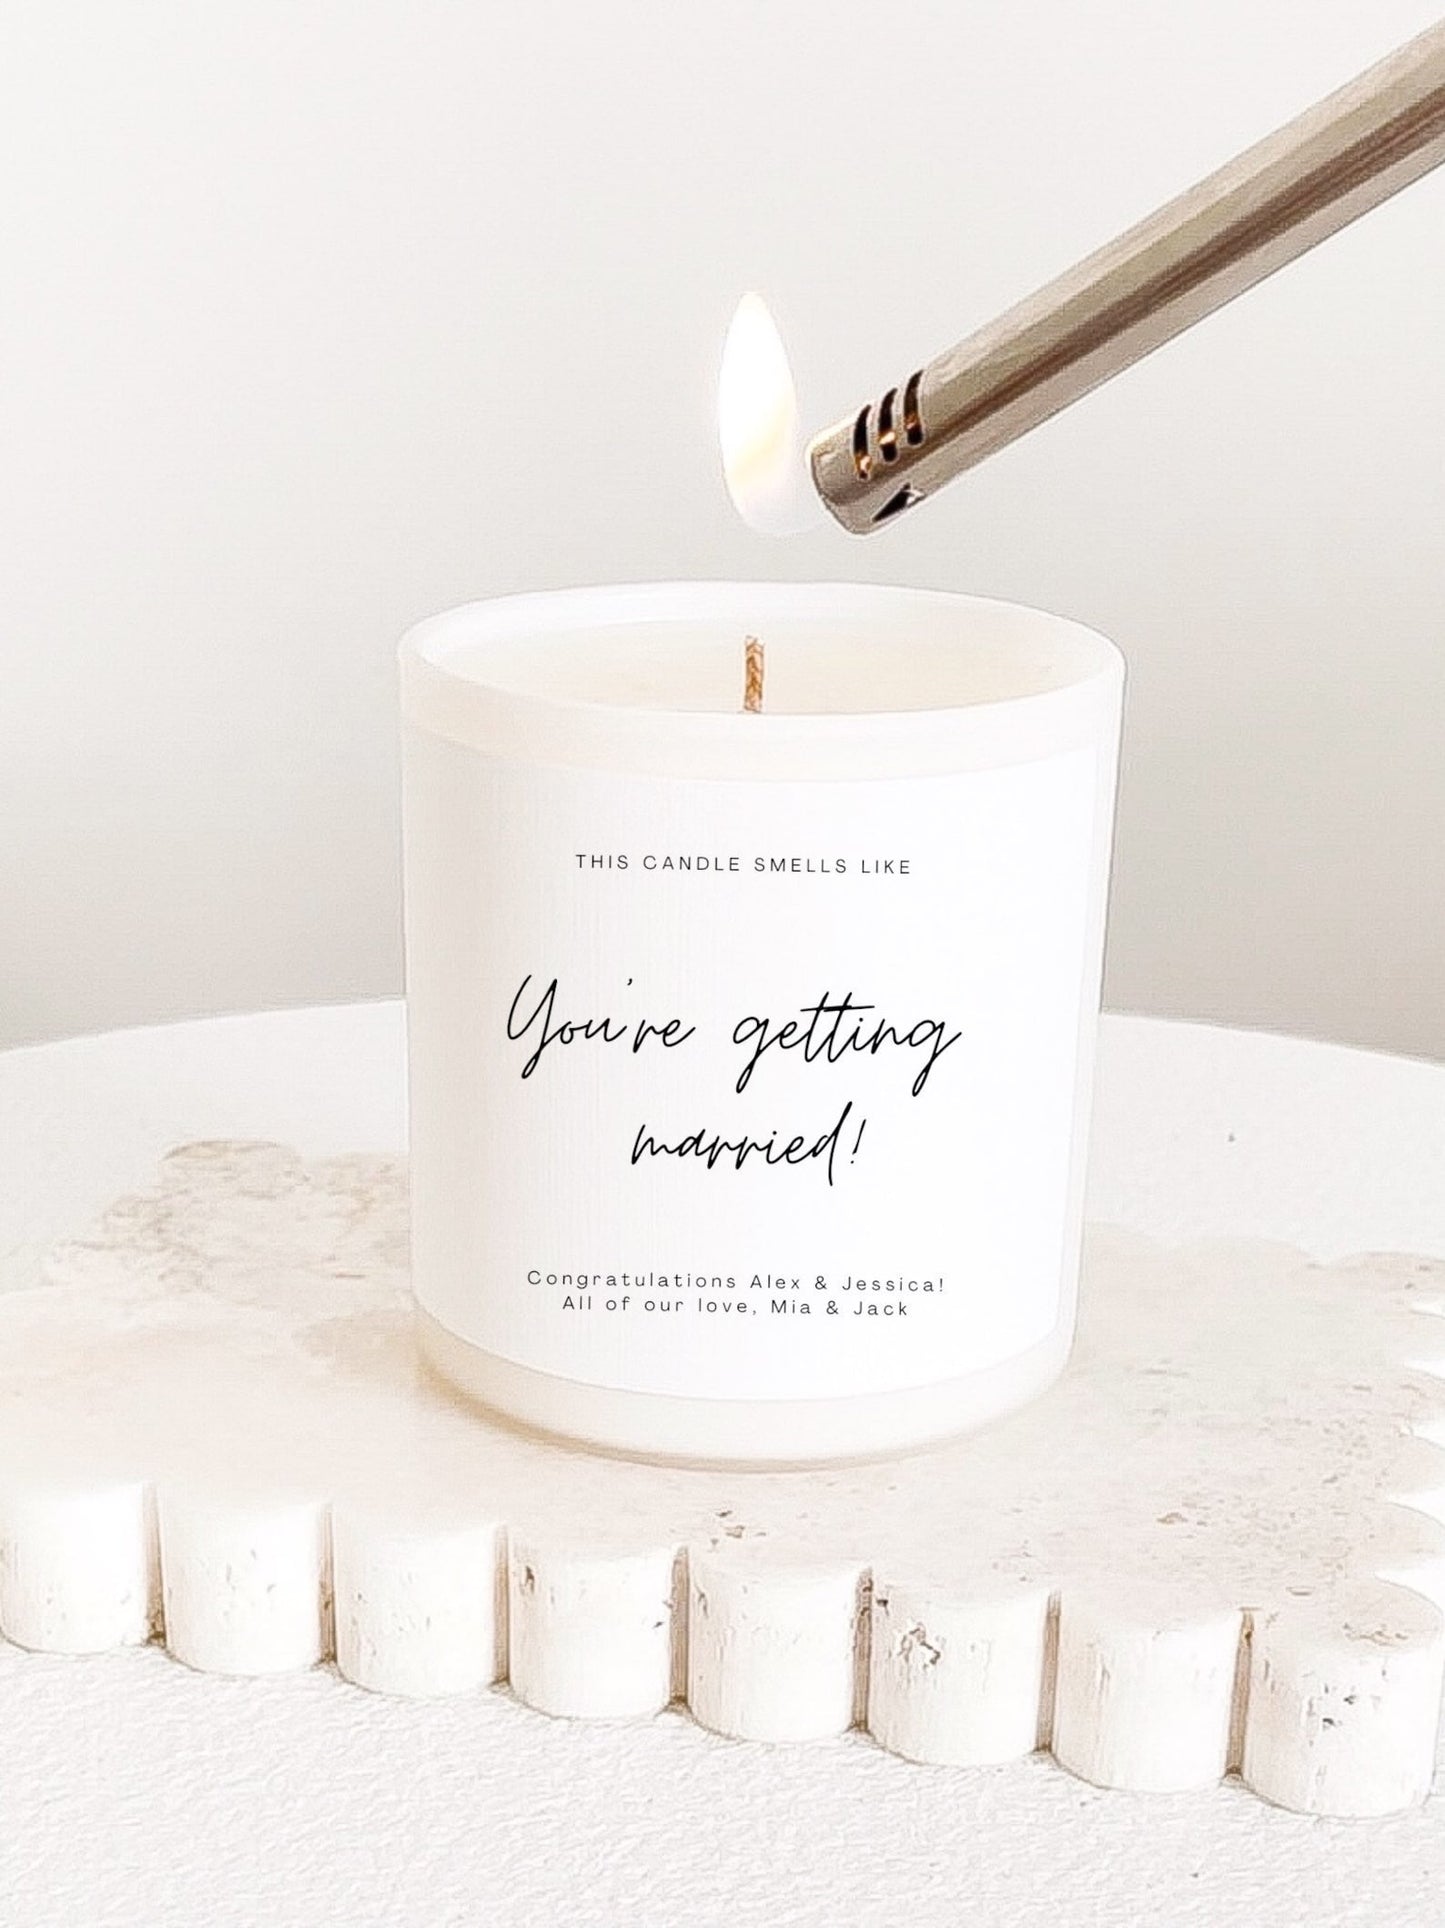 This Candle Smells Like You're Getting Married